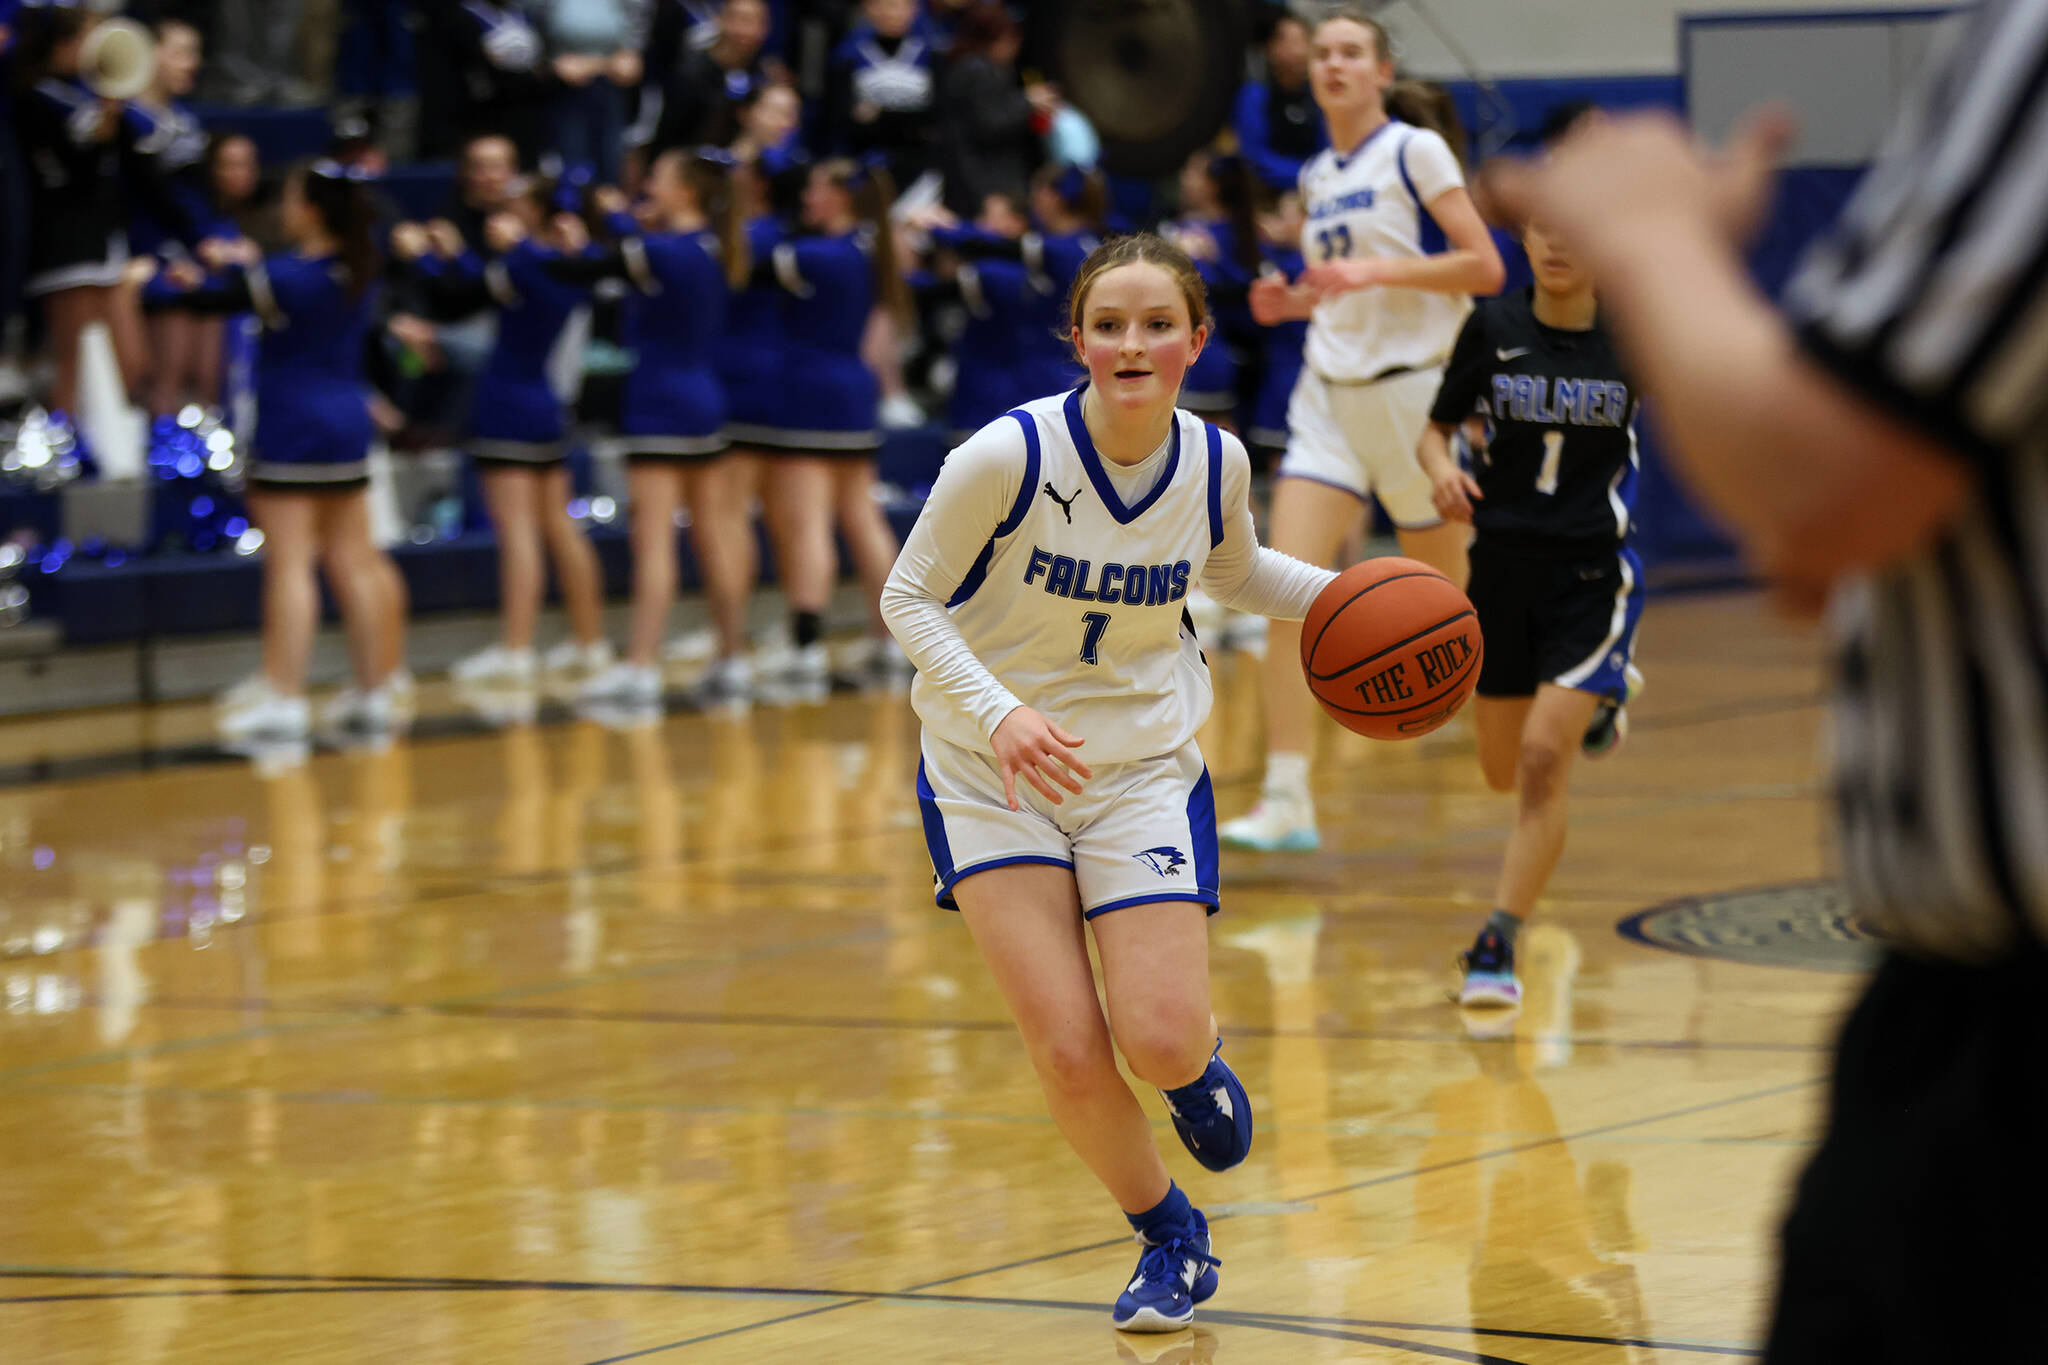 Freshman Cambry Lockhart sprints down the court during a TMHS home win Saturday night. Lockhart was one of four Lady Falcons to score 9 points. She had a late steal that helped seal the outcome. (Ben Hohenstatt / Juneau Empire)